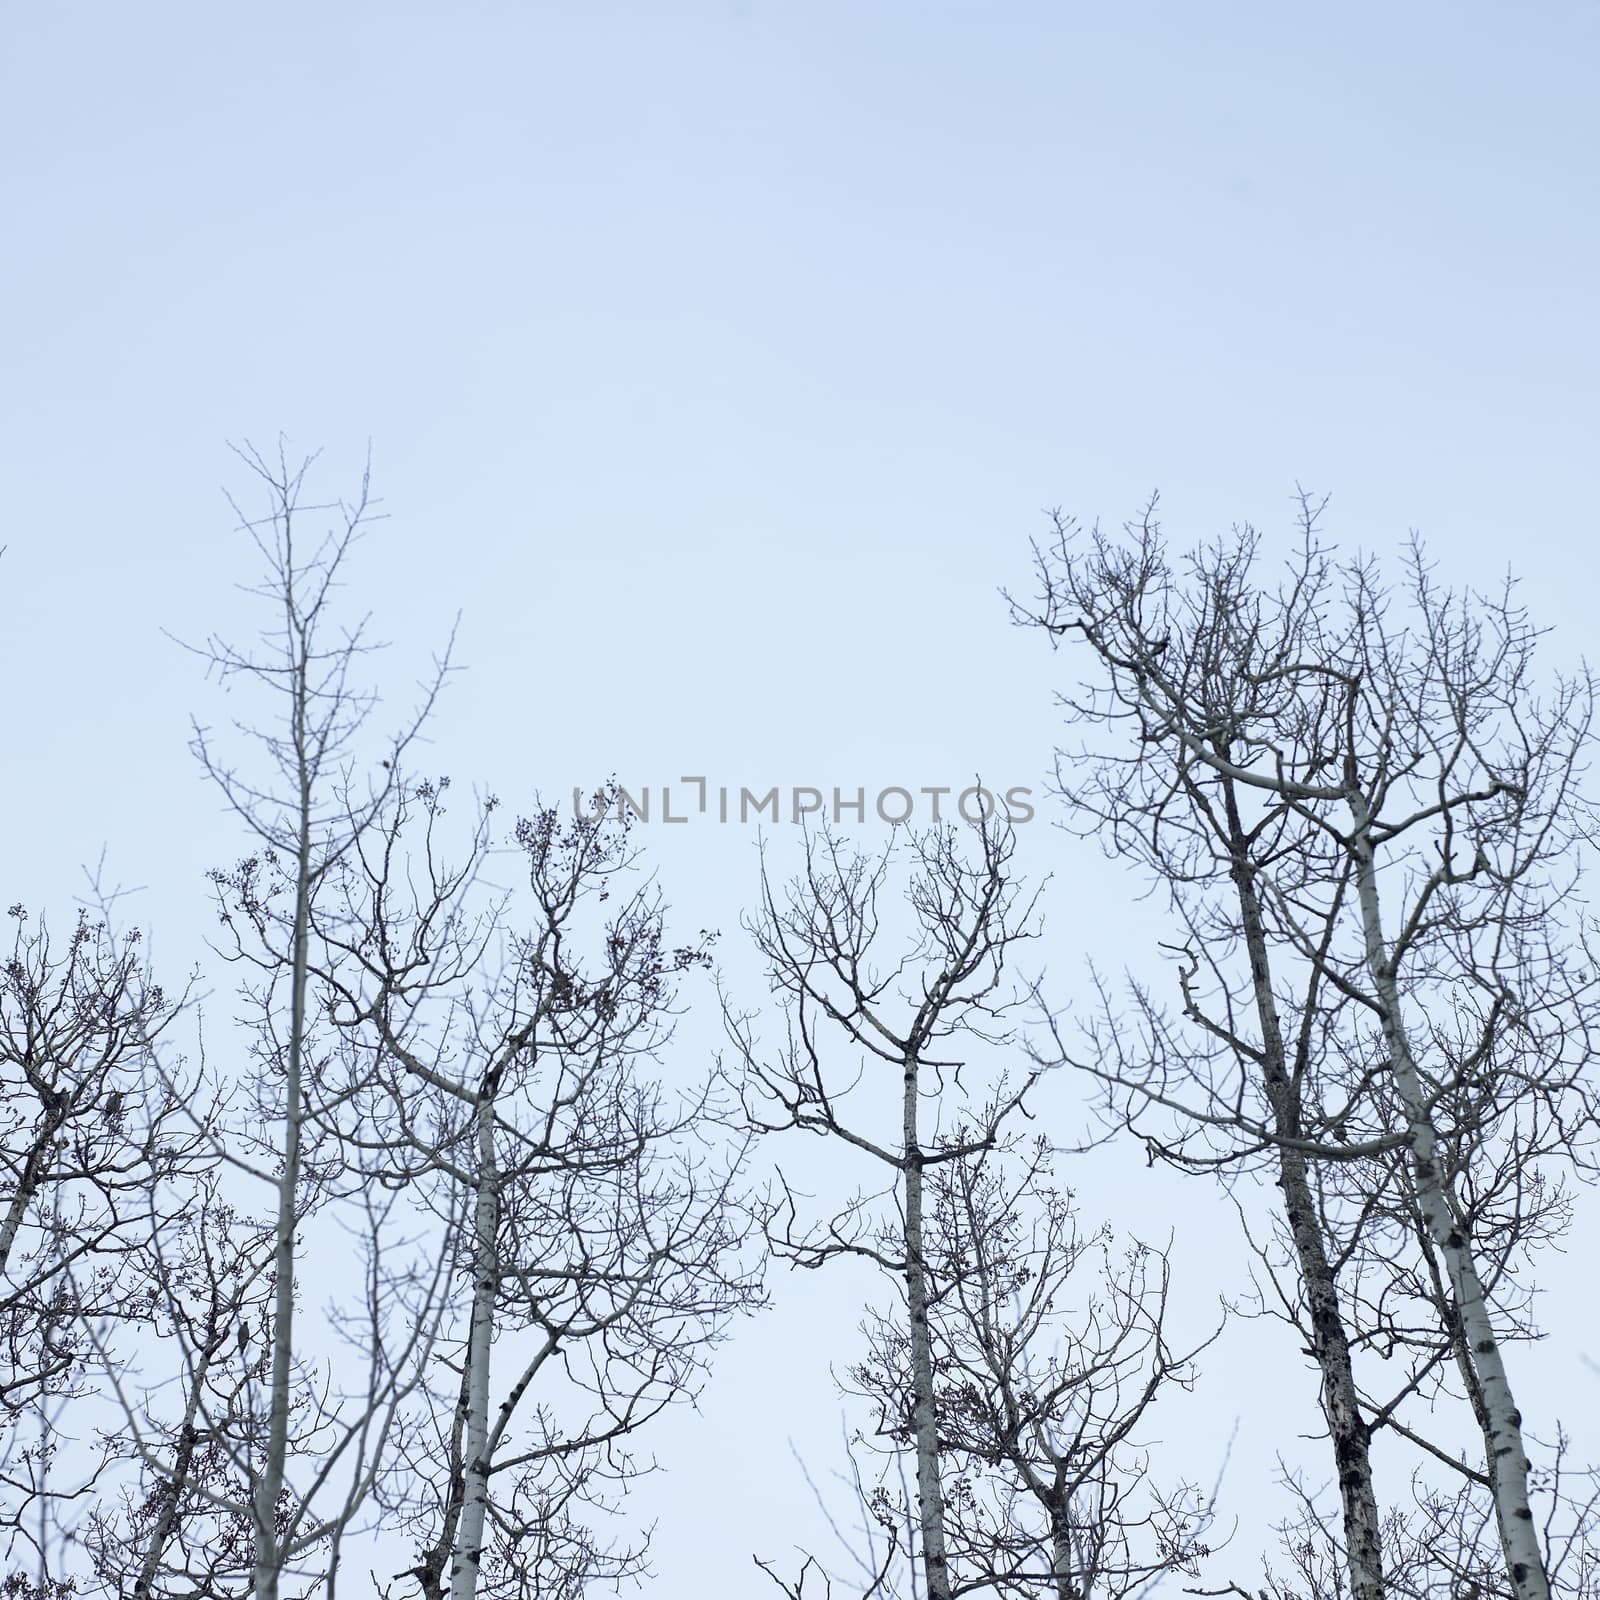 Bare trunks and branches of a leafless birch trees against a misty blue sky